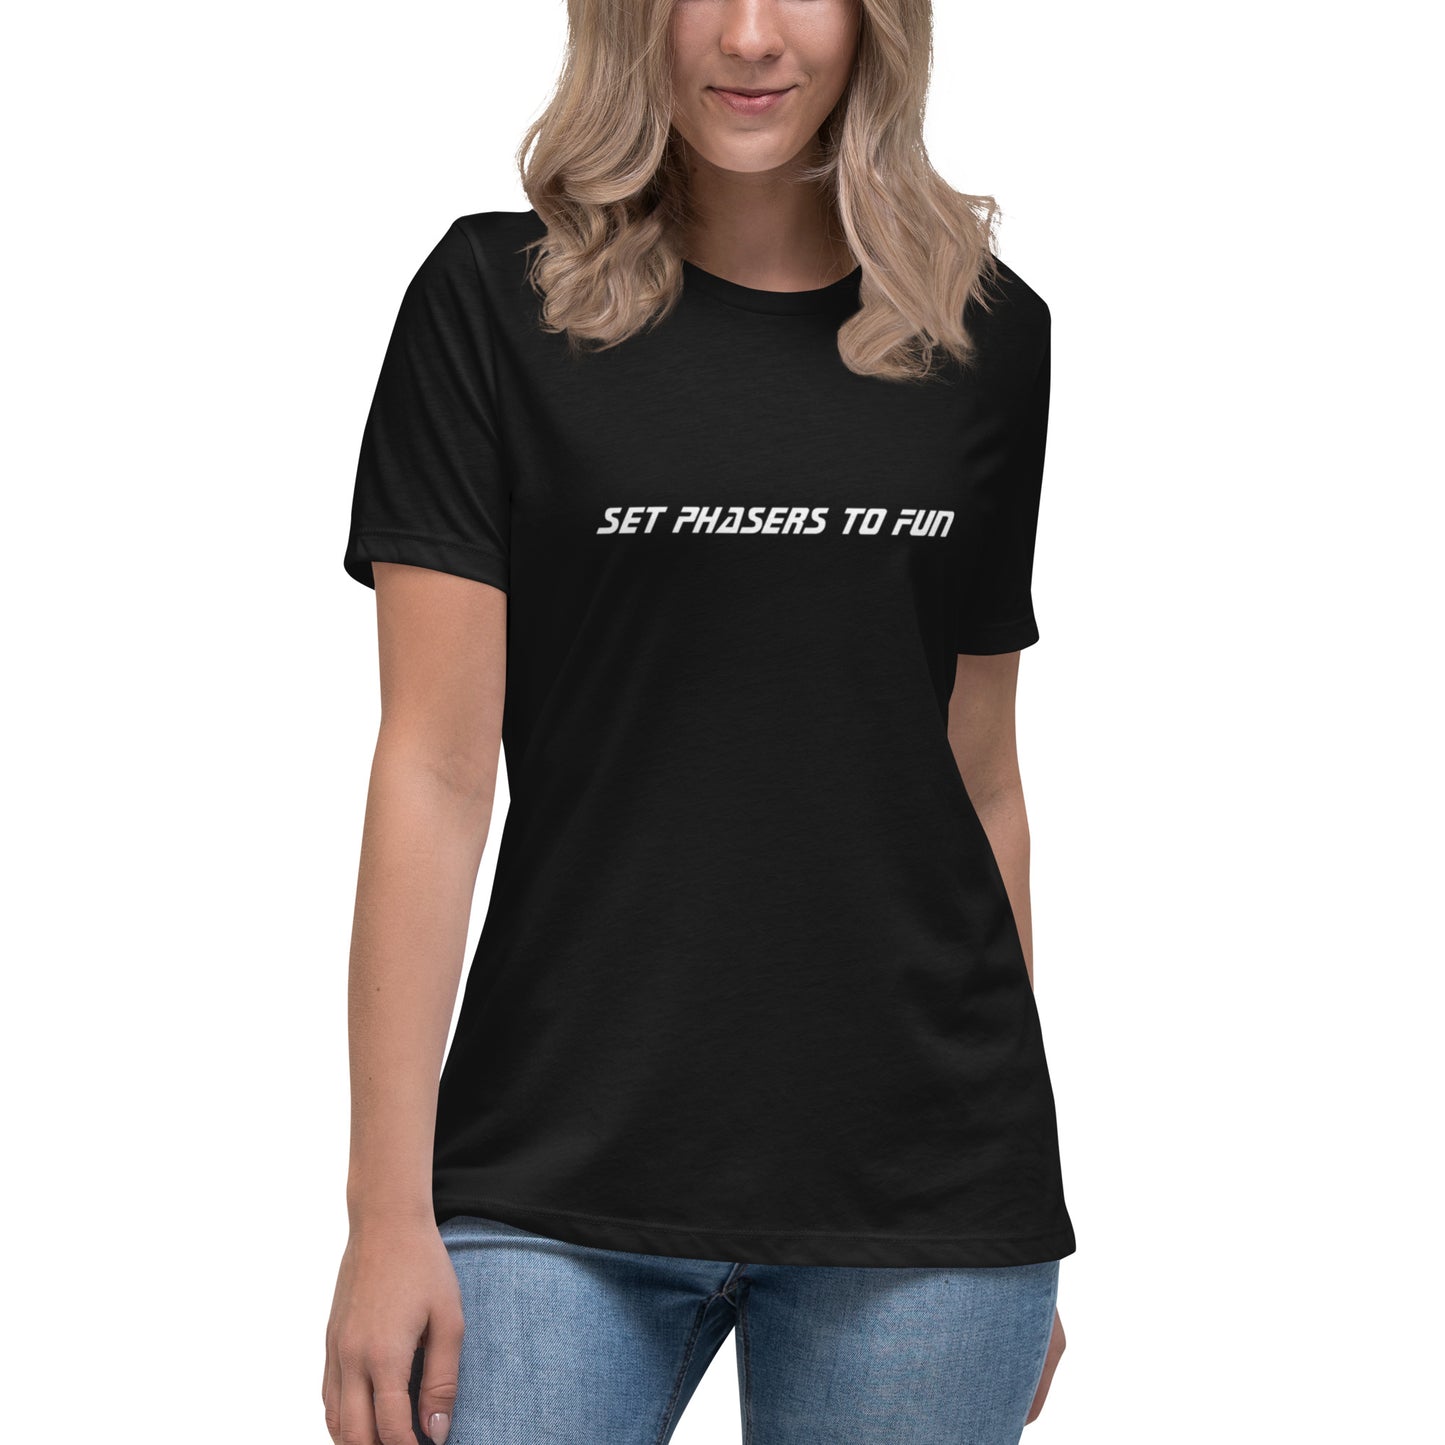 Women's Dark Relaxed T-Shirt - Set Phasers